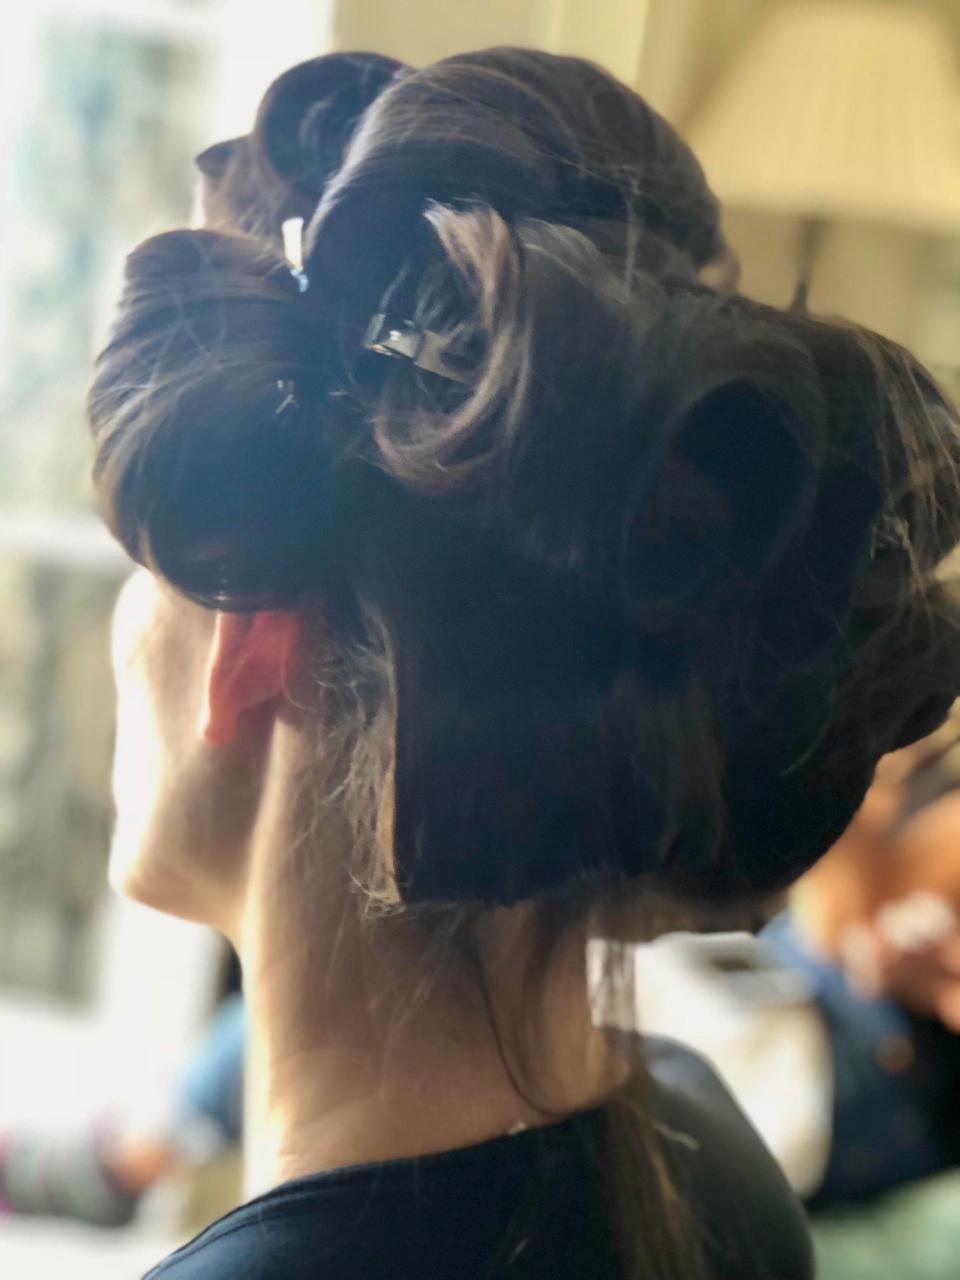 Jennifer Garner's longtime stylist Adir Abergel gave Allure a behind-the-scenes look at the actor's voluminous hairstyle for the 2018 Oscars.